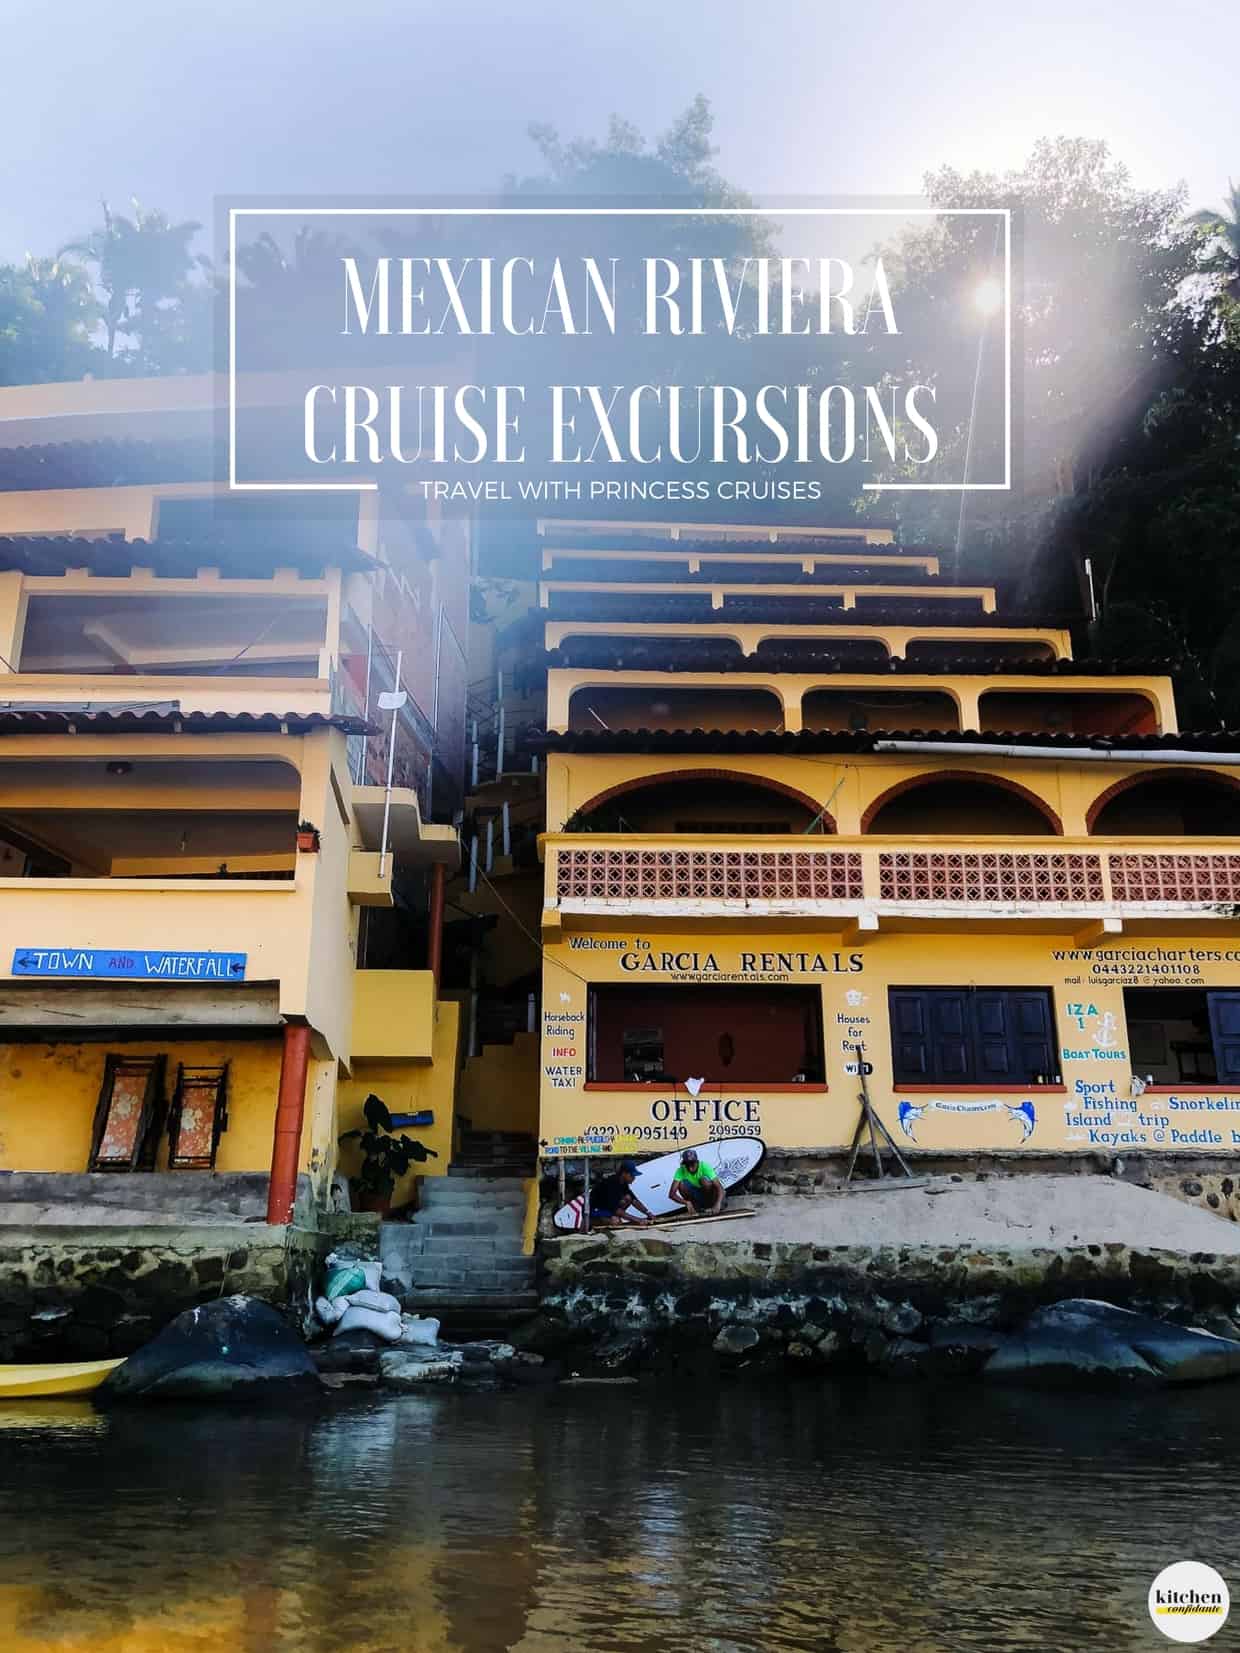 Read all about all the excursions I took on my Mexican Riviera Cruise with @PrincessCruises, with stops in #PuertoVallarta #Mazatlan and #CaboSanLucas! #ad #comebacknew #travel #cruise #cruising #rubyprincess #princesscruises #vacation #travelguide #foodietravel